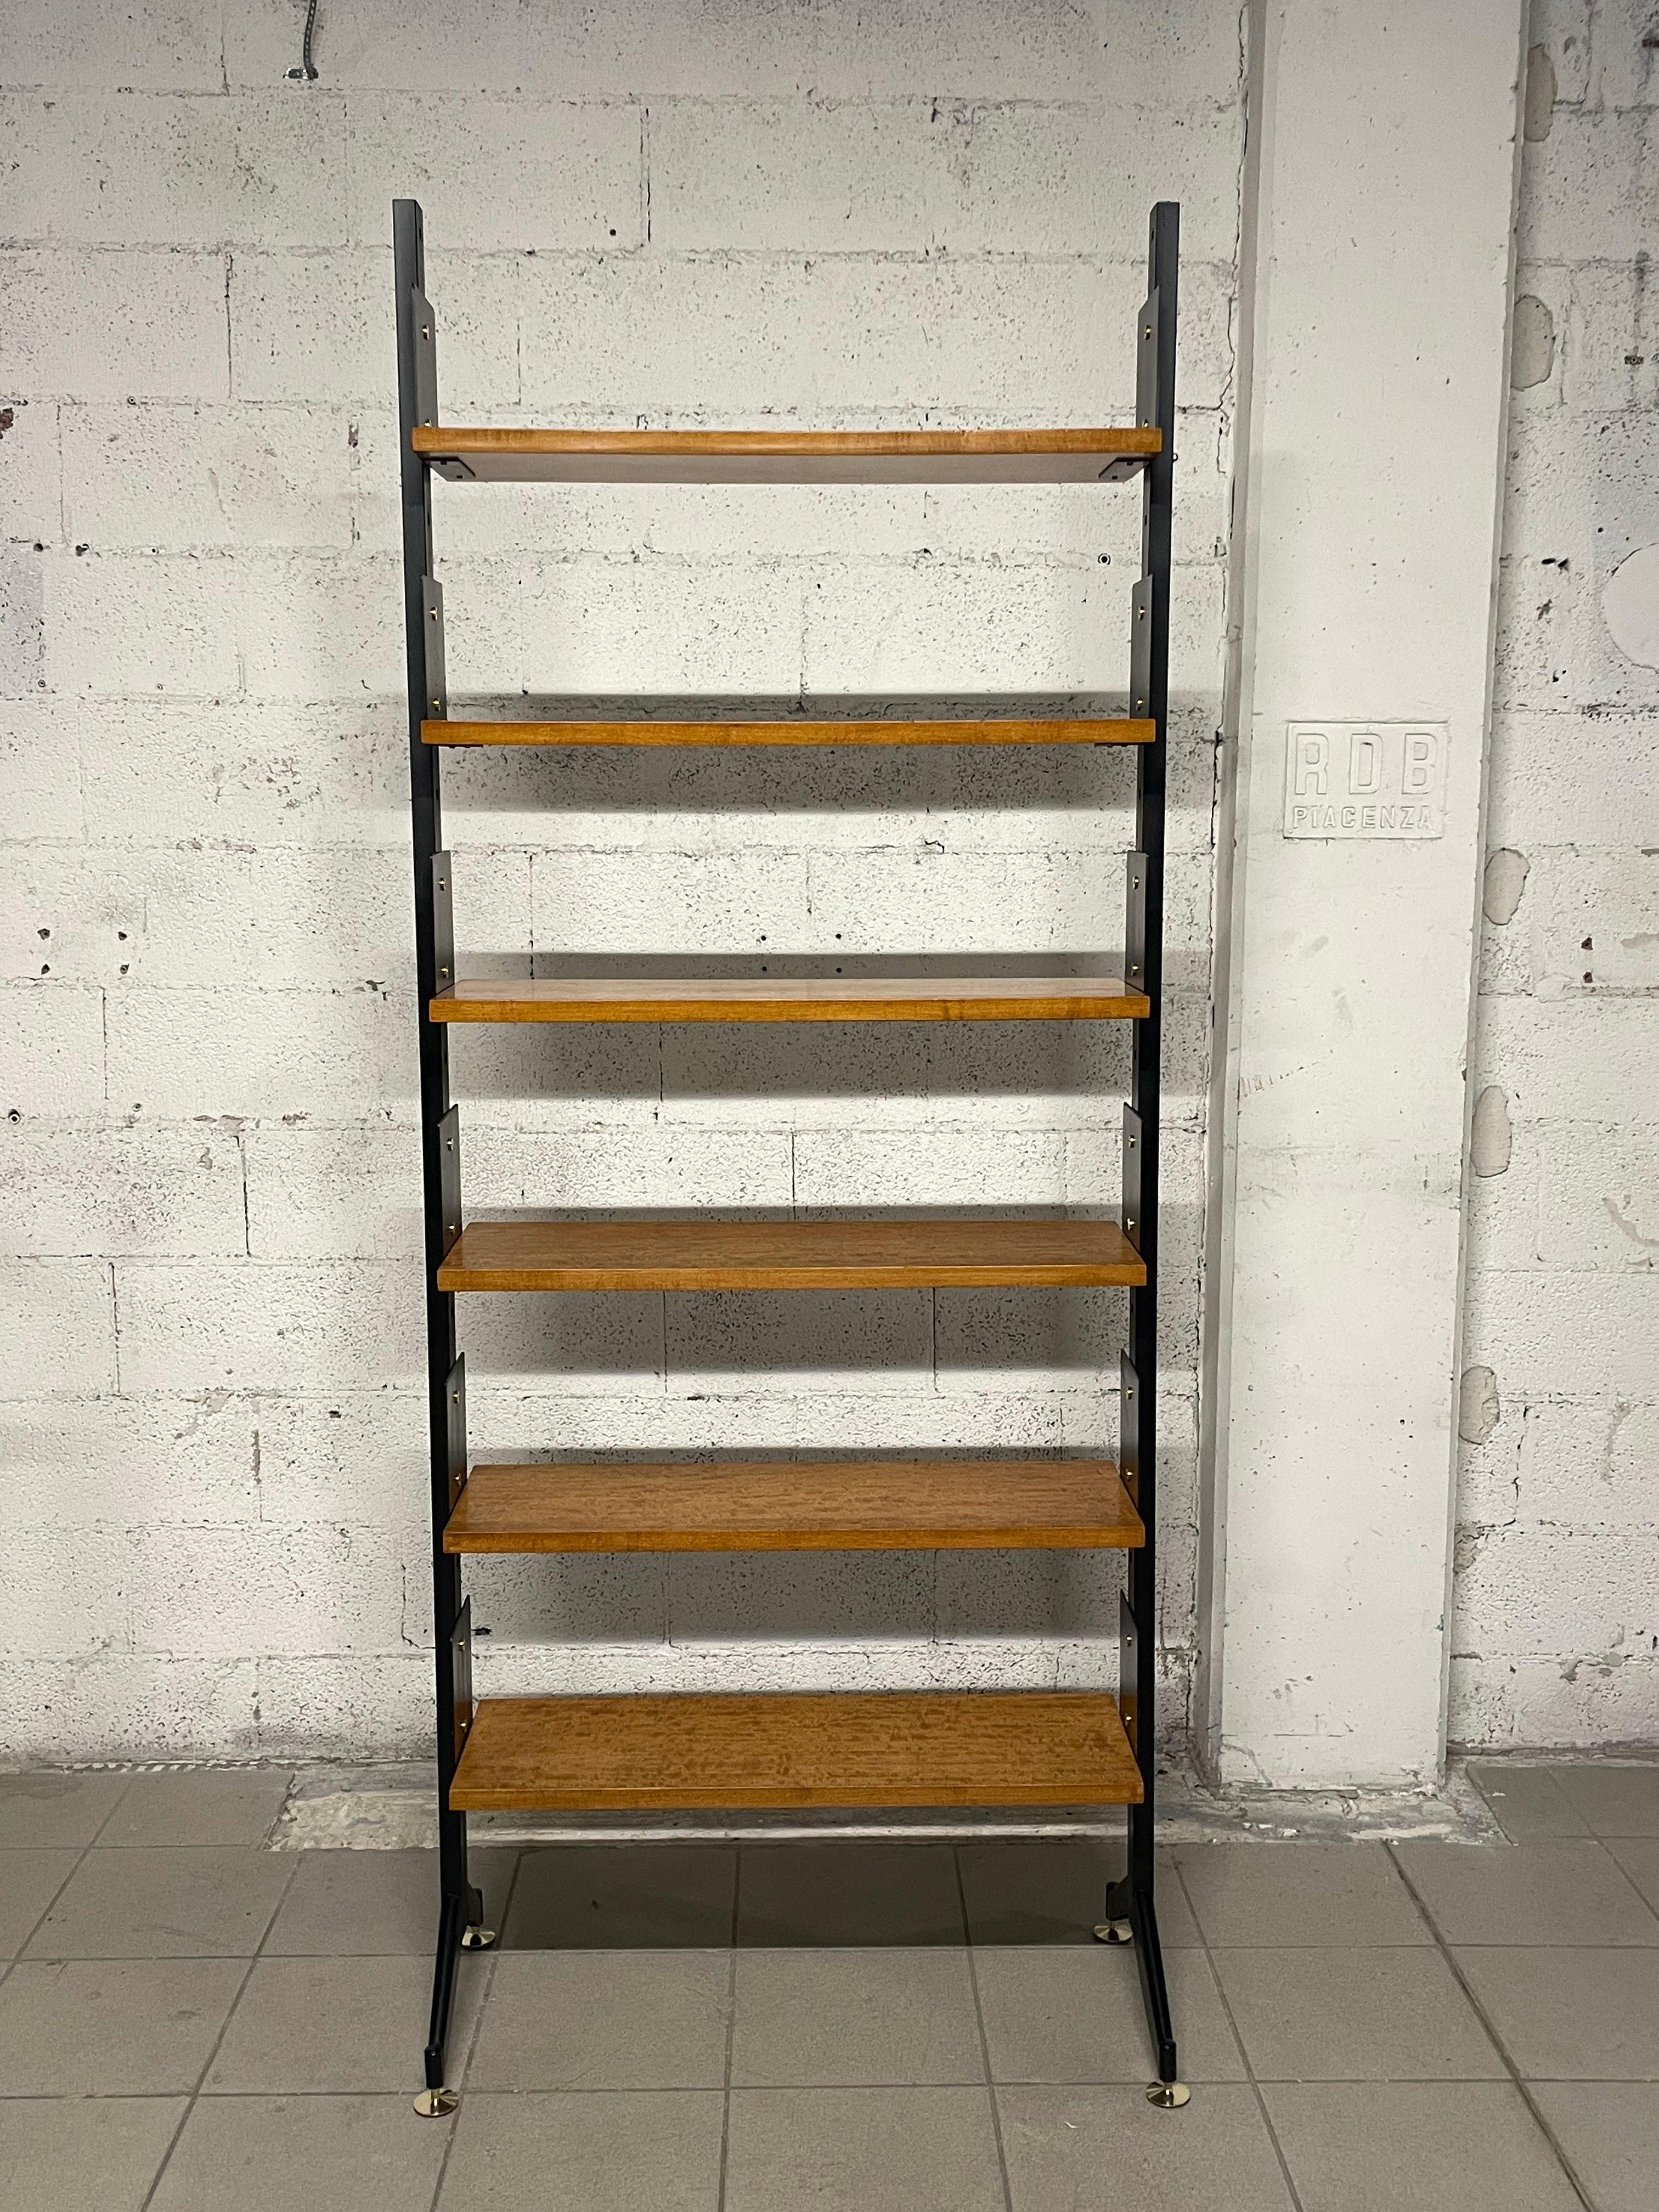 1950s bookcase with black painted iron uprights and brass feet.

The bookcase consists of 6 adjustable-height wooden shelves 25 cm deep.

Fully restored.